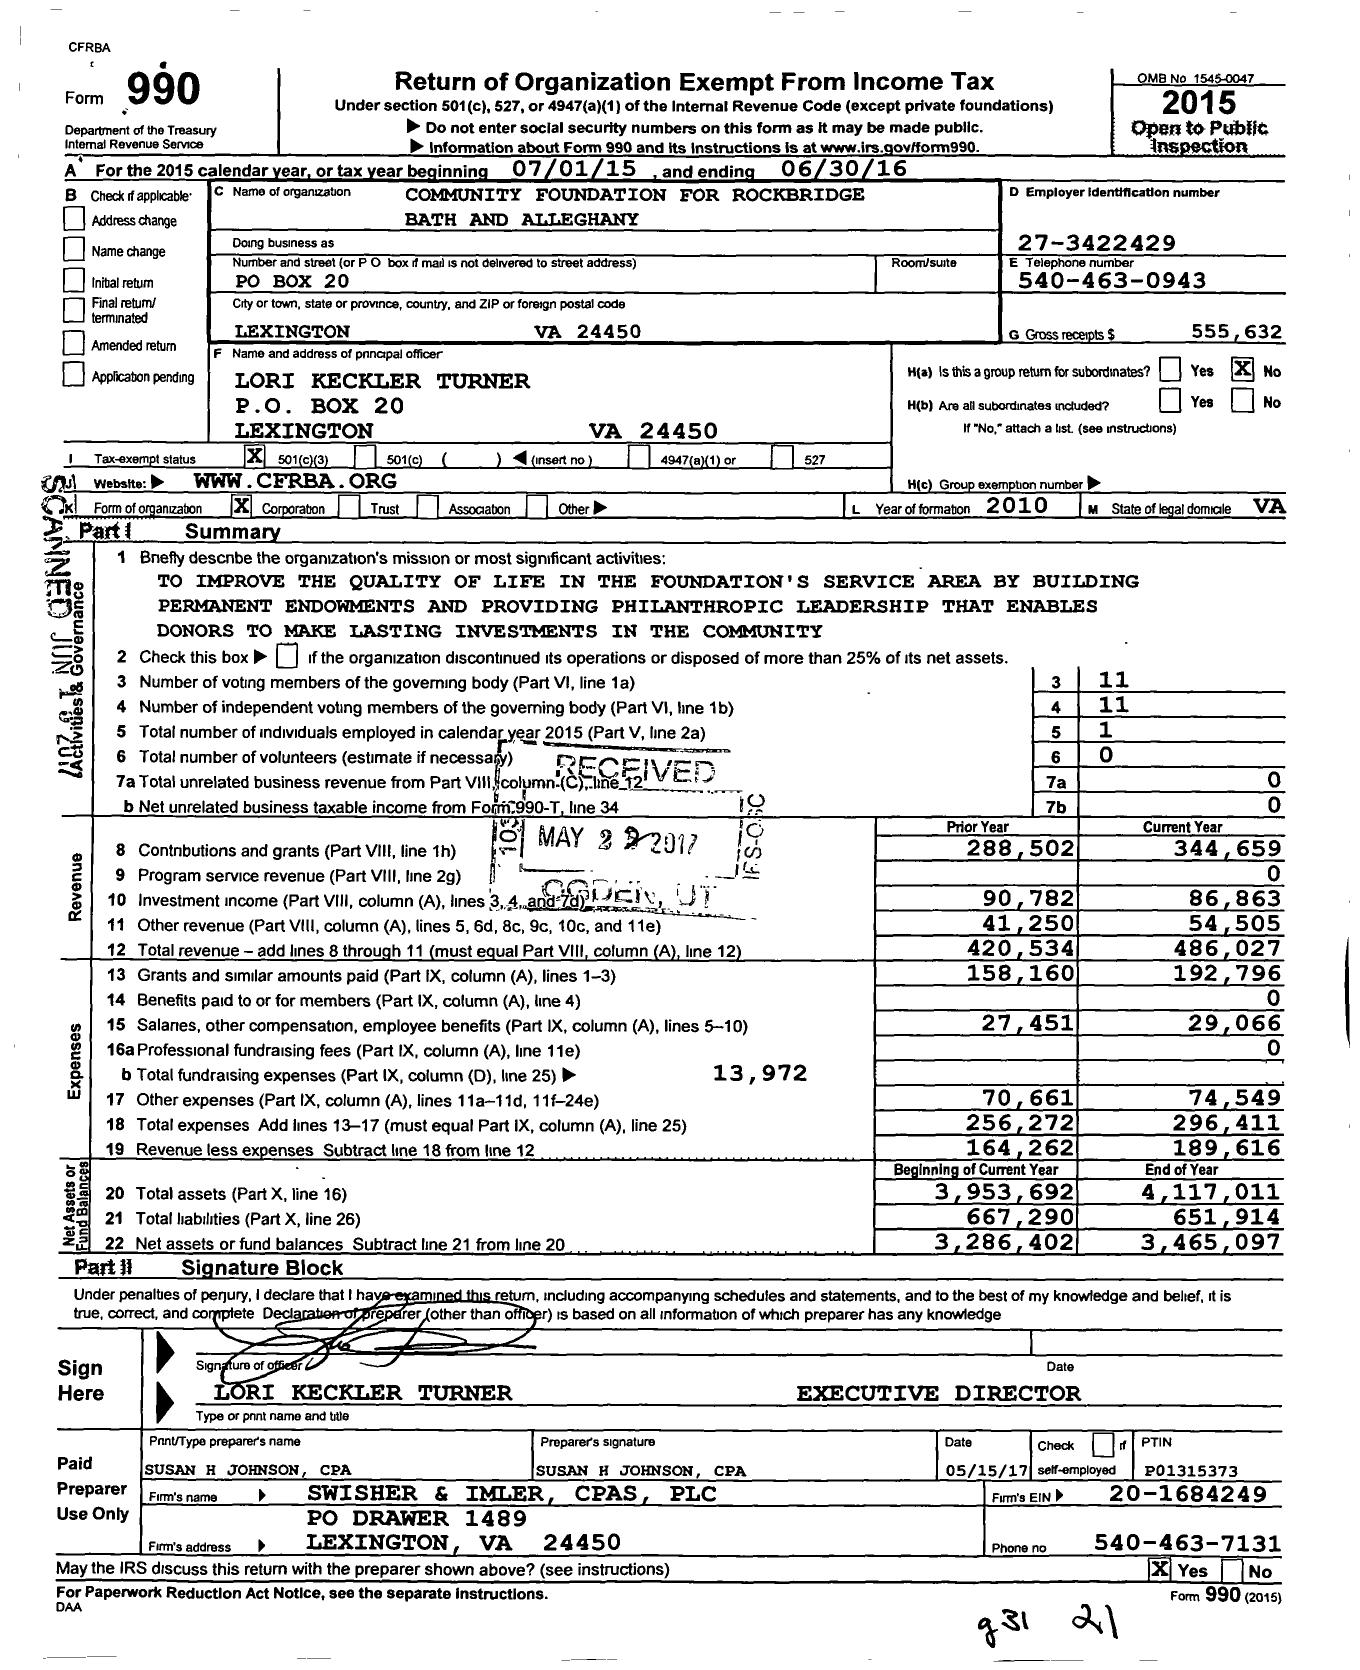 Image of first page of 2015 Form 990 for Community Foundation for Rockbridge Bath and Allegheny